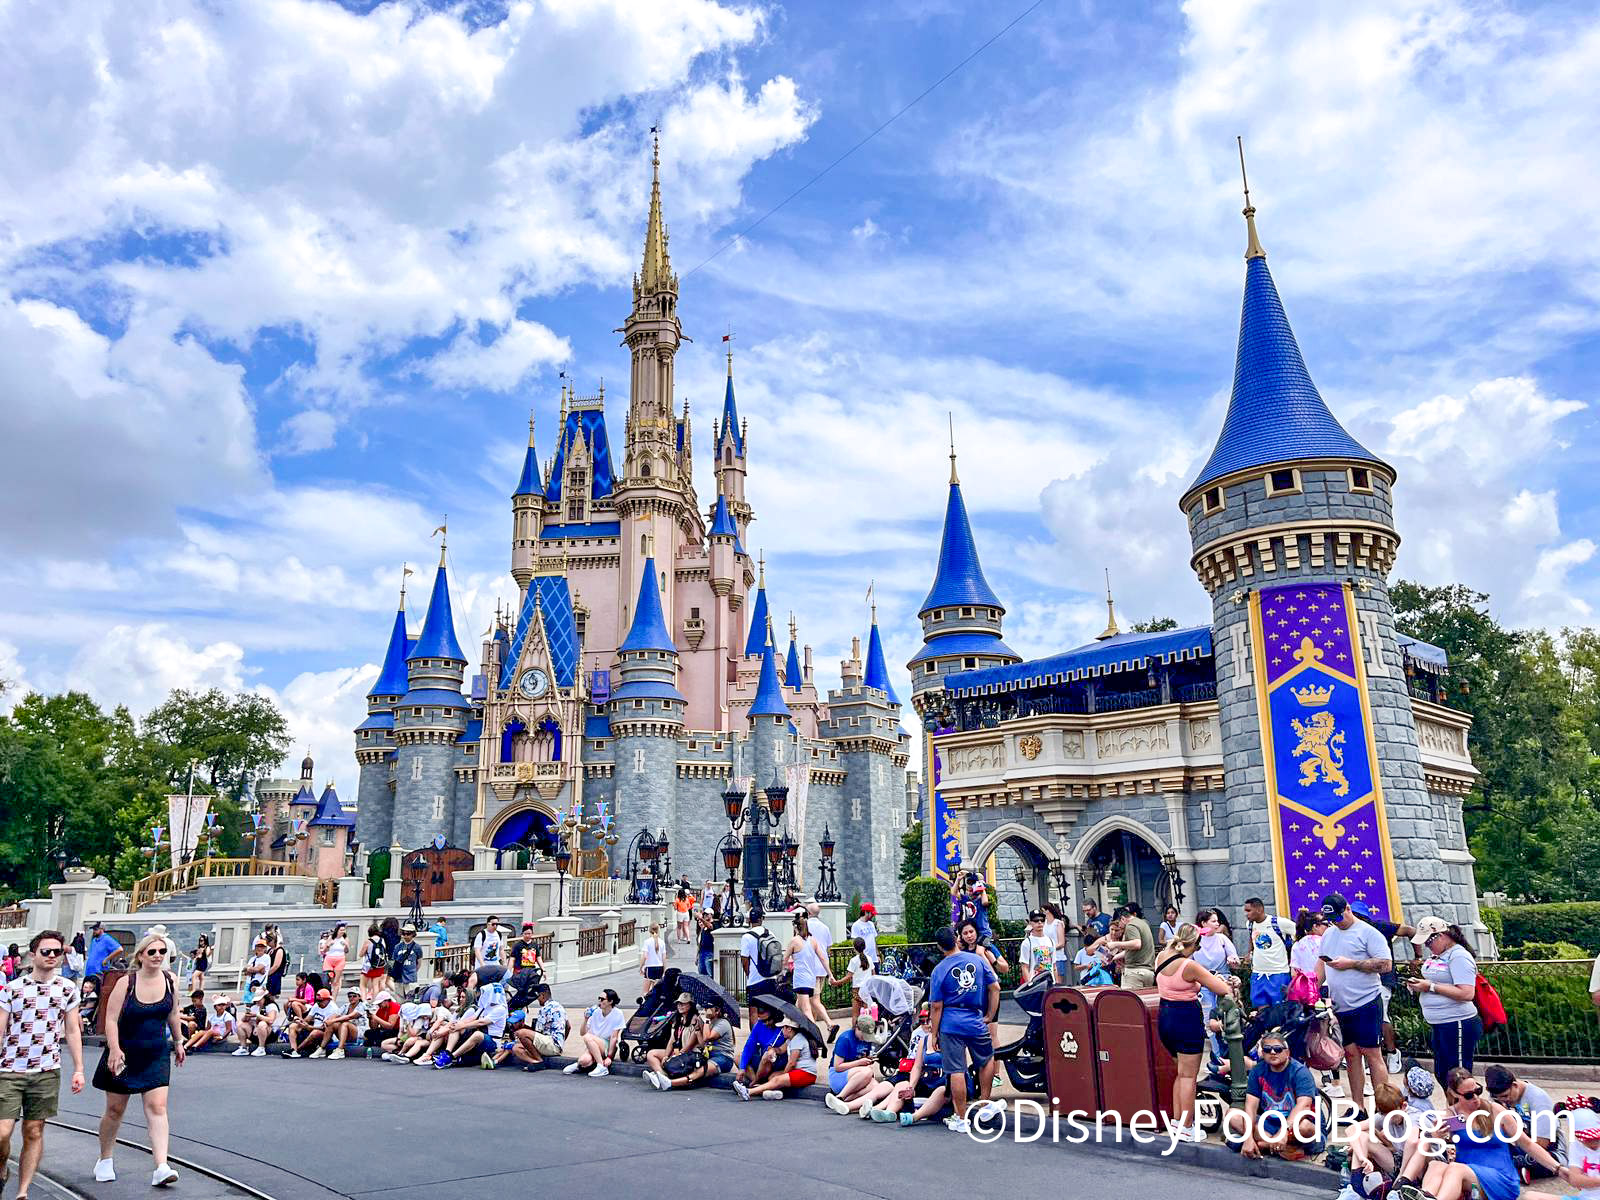 Disney World Crowds Have Gotten Unpredictable. Here’s How To Make That